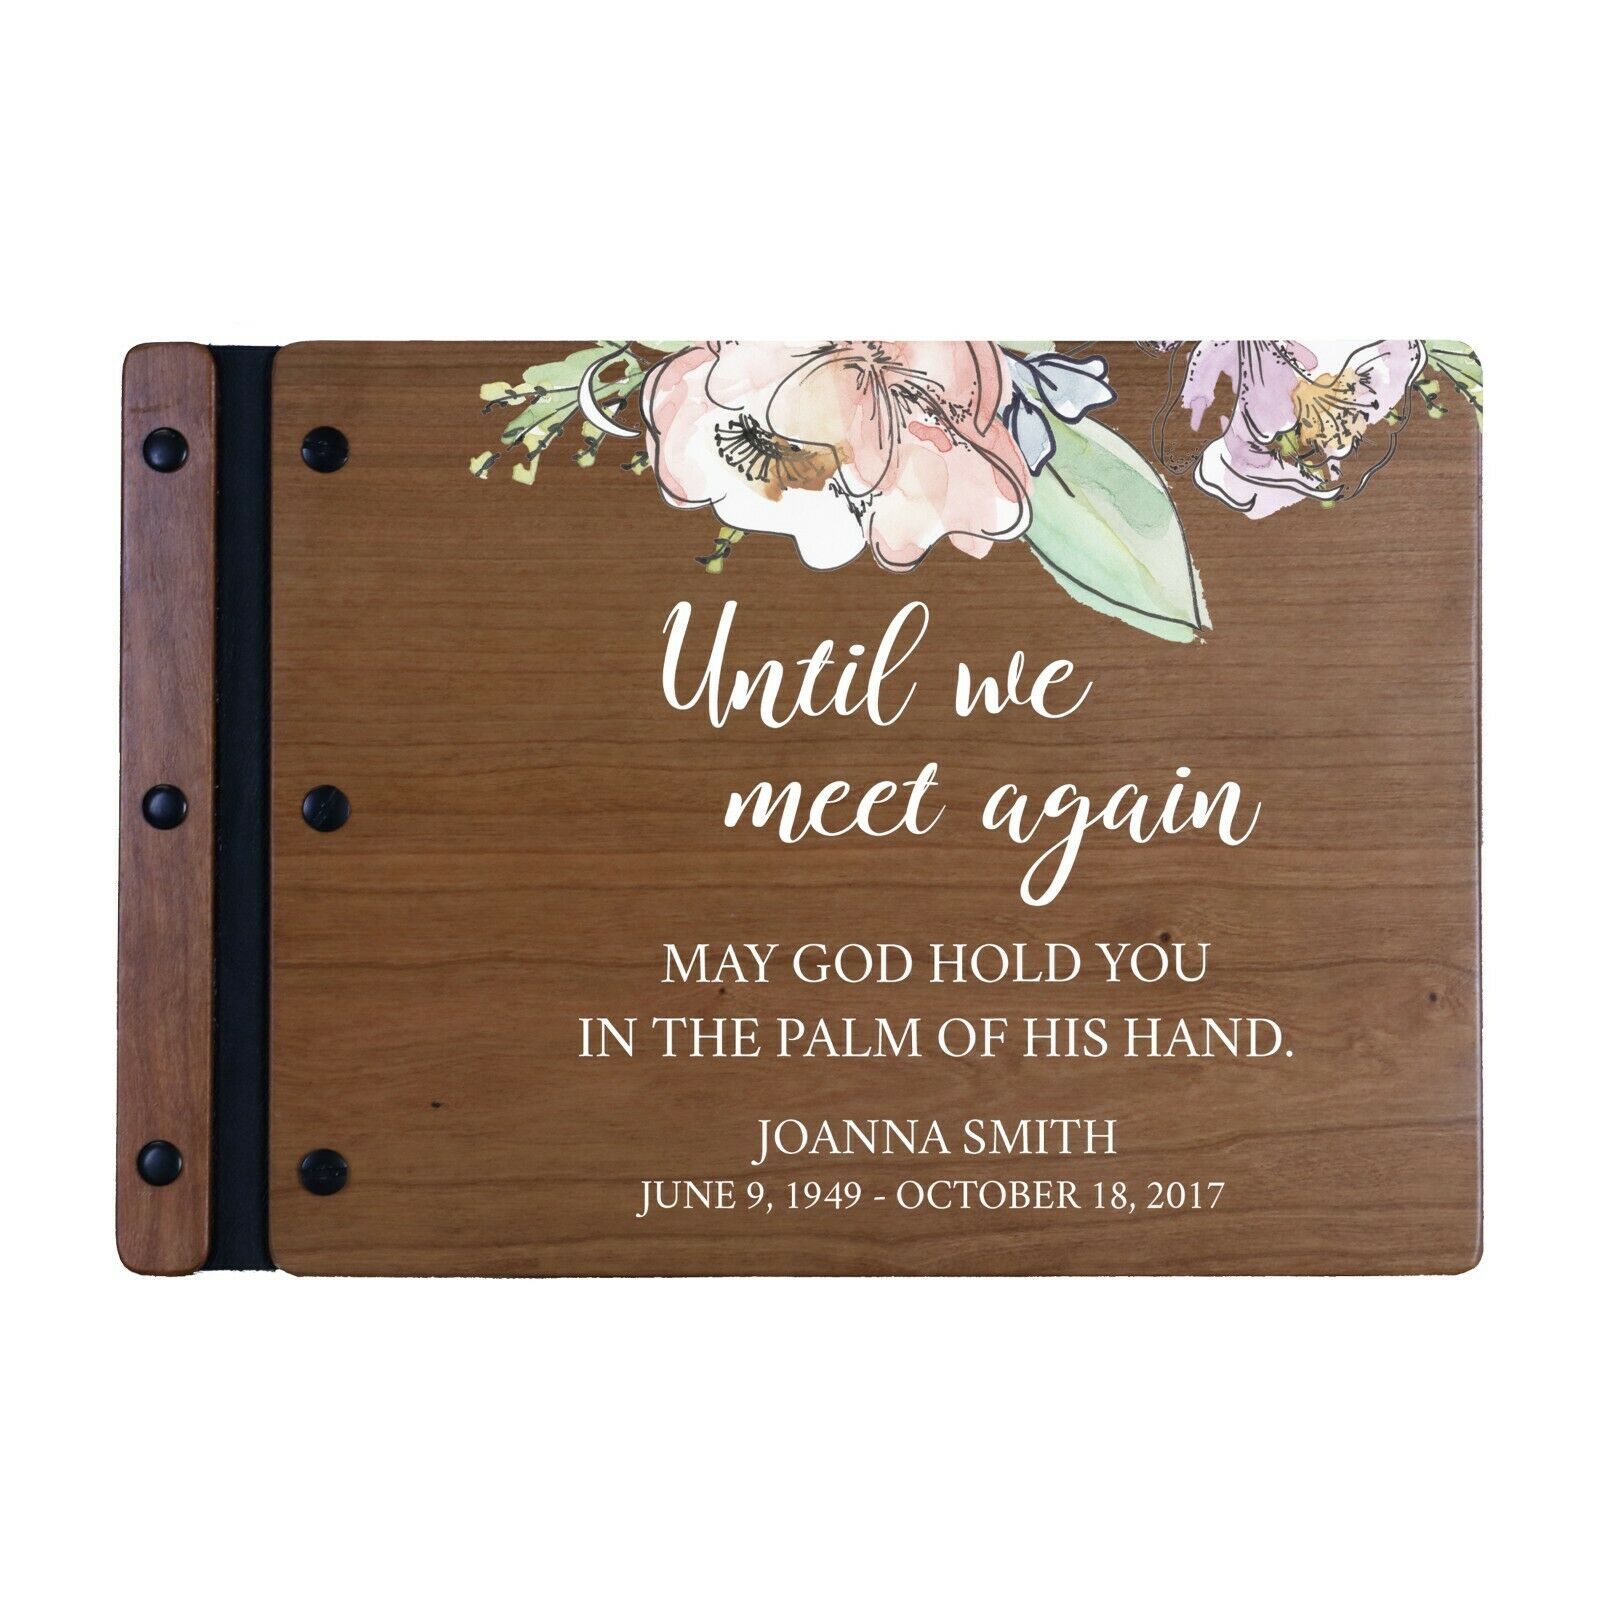 Custom Memorial Funeral Guest Book For Loss Of Loved One 12x8 - Until We Meet